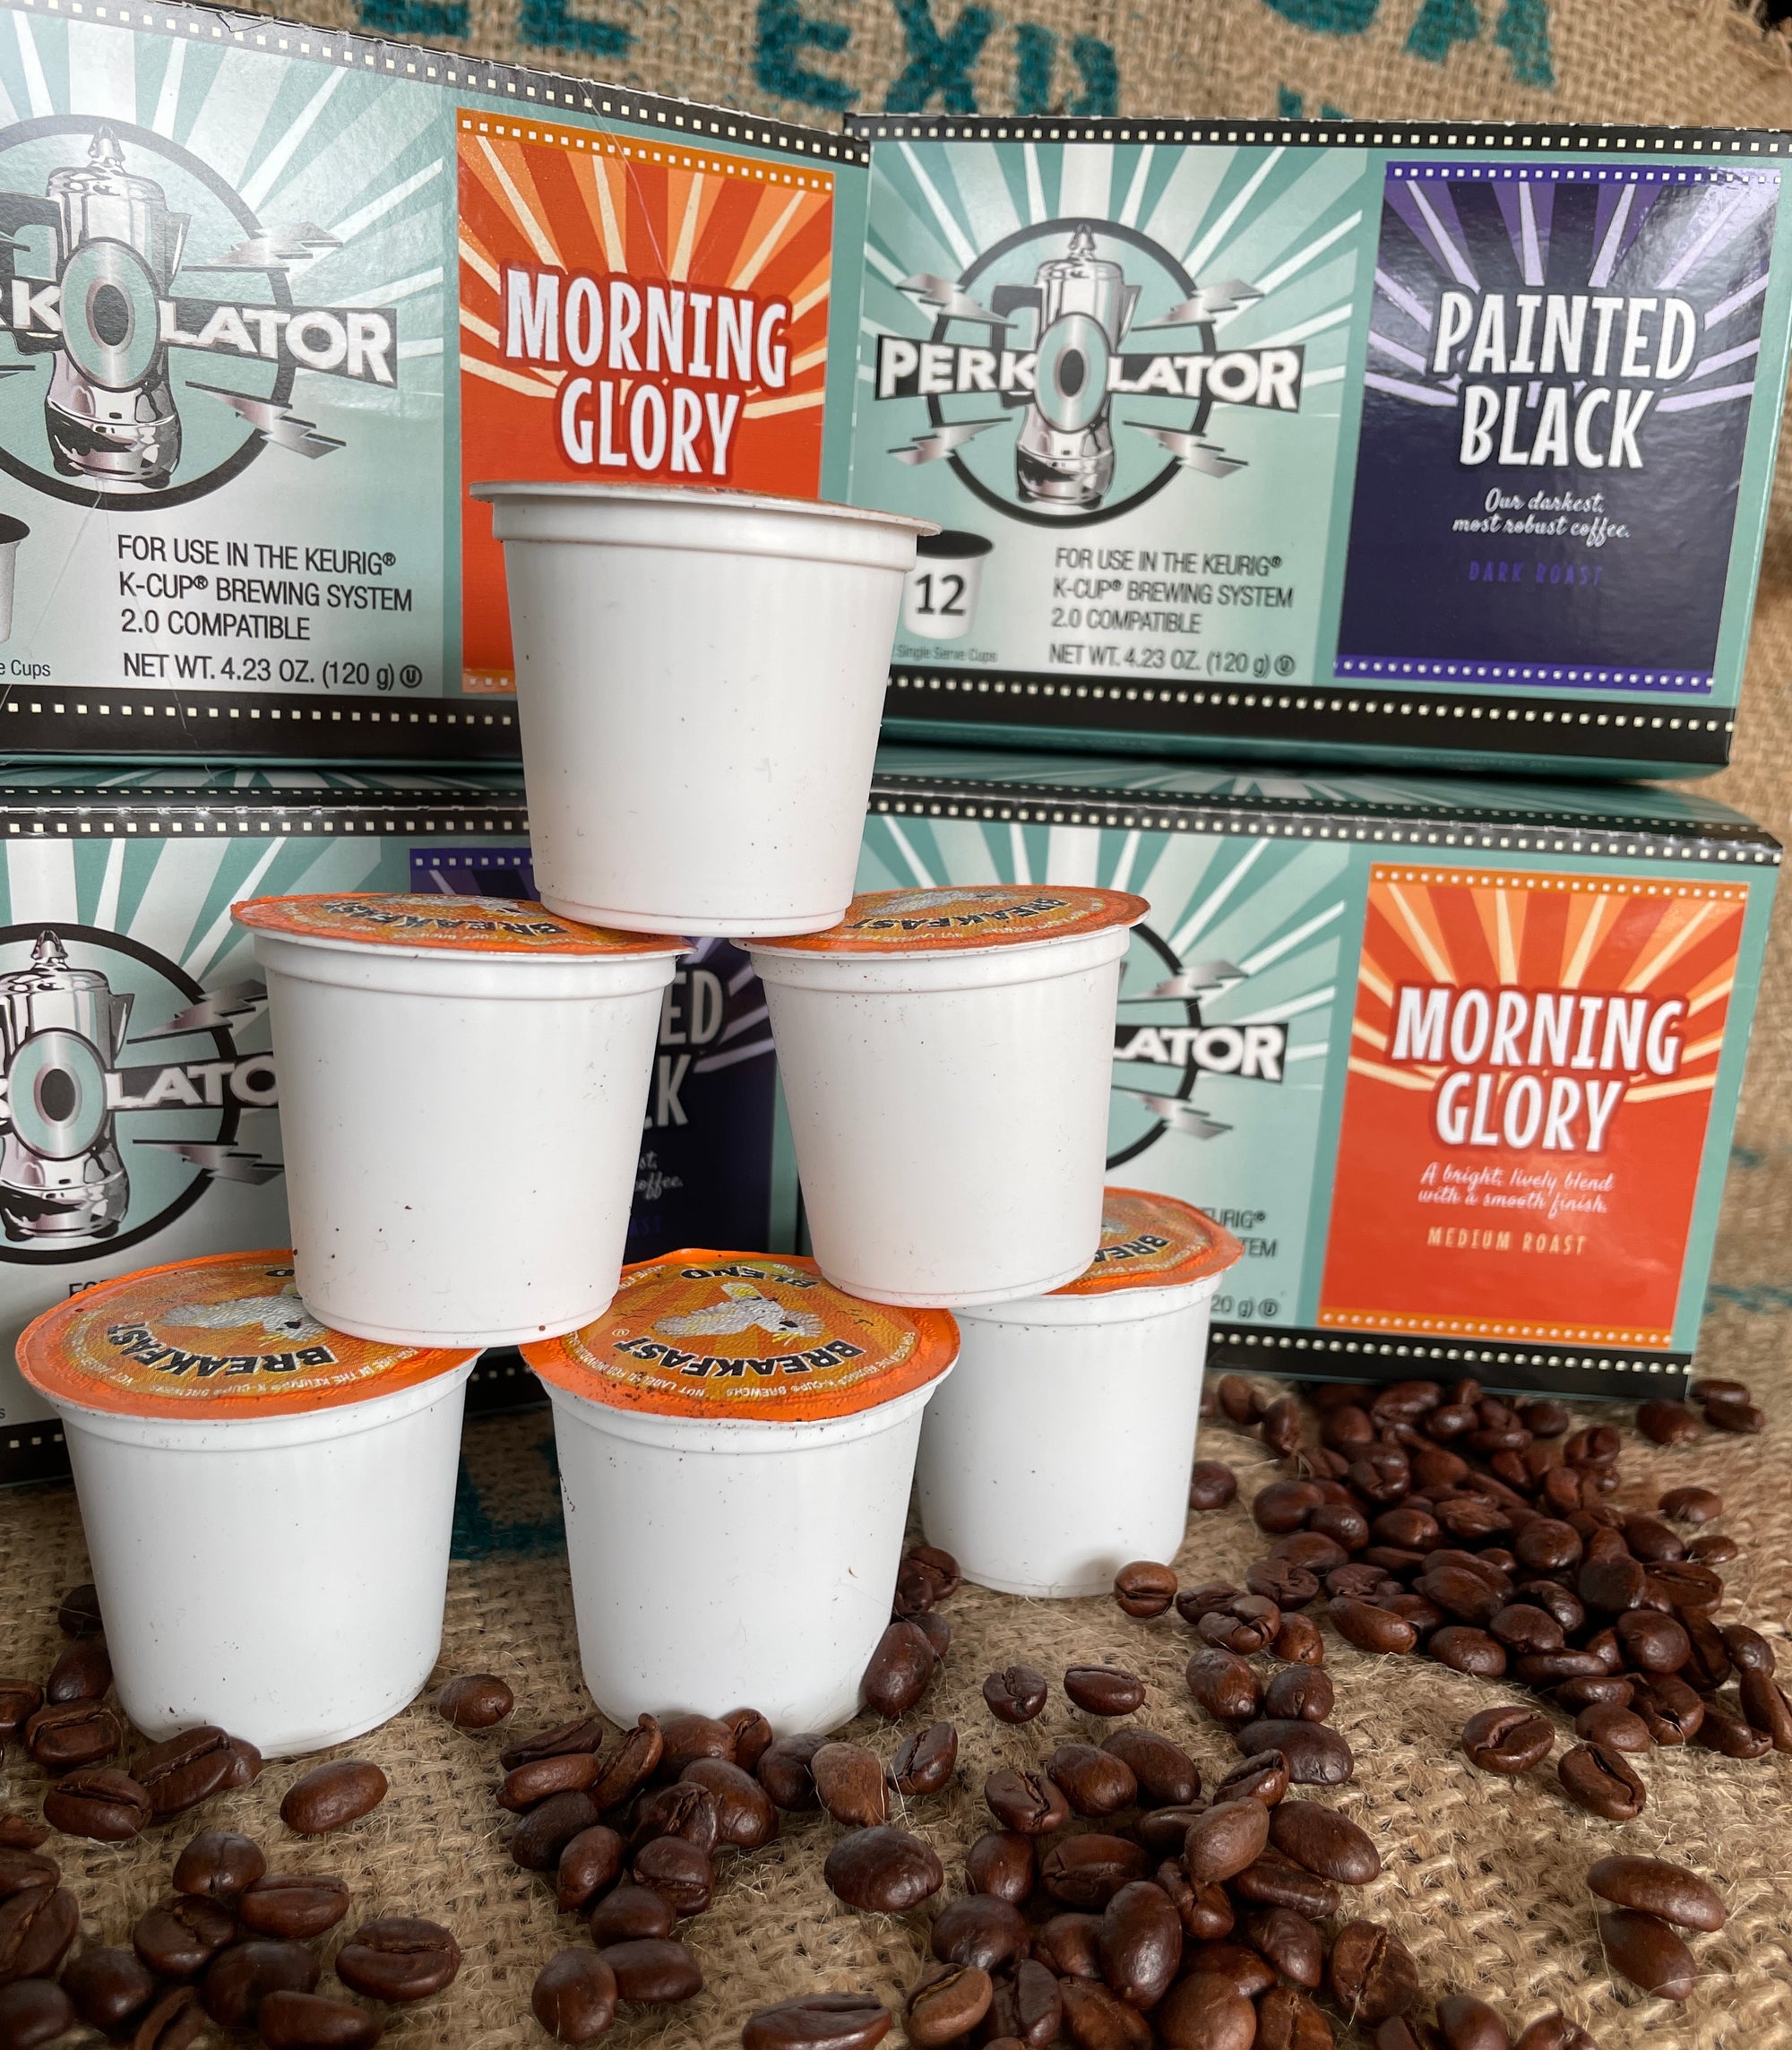 Let’s talk K-Cups®: scourge of the earth, or the coffee of the future?